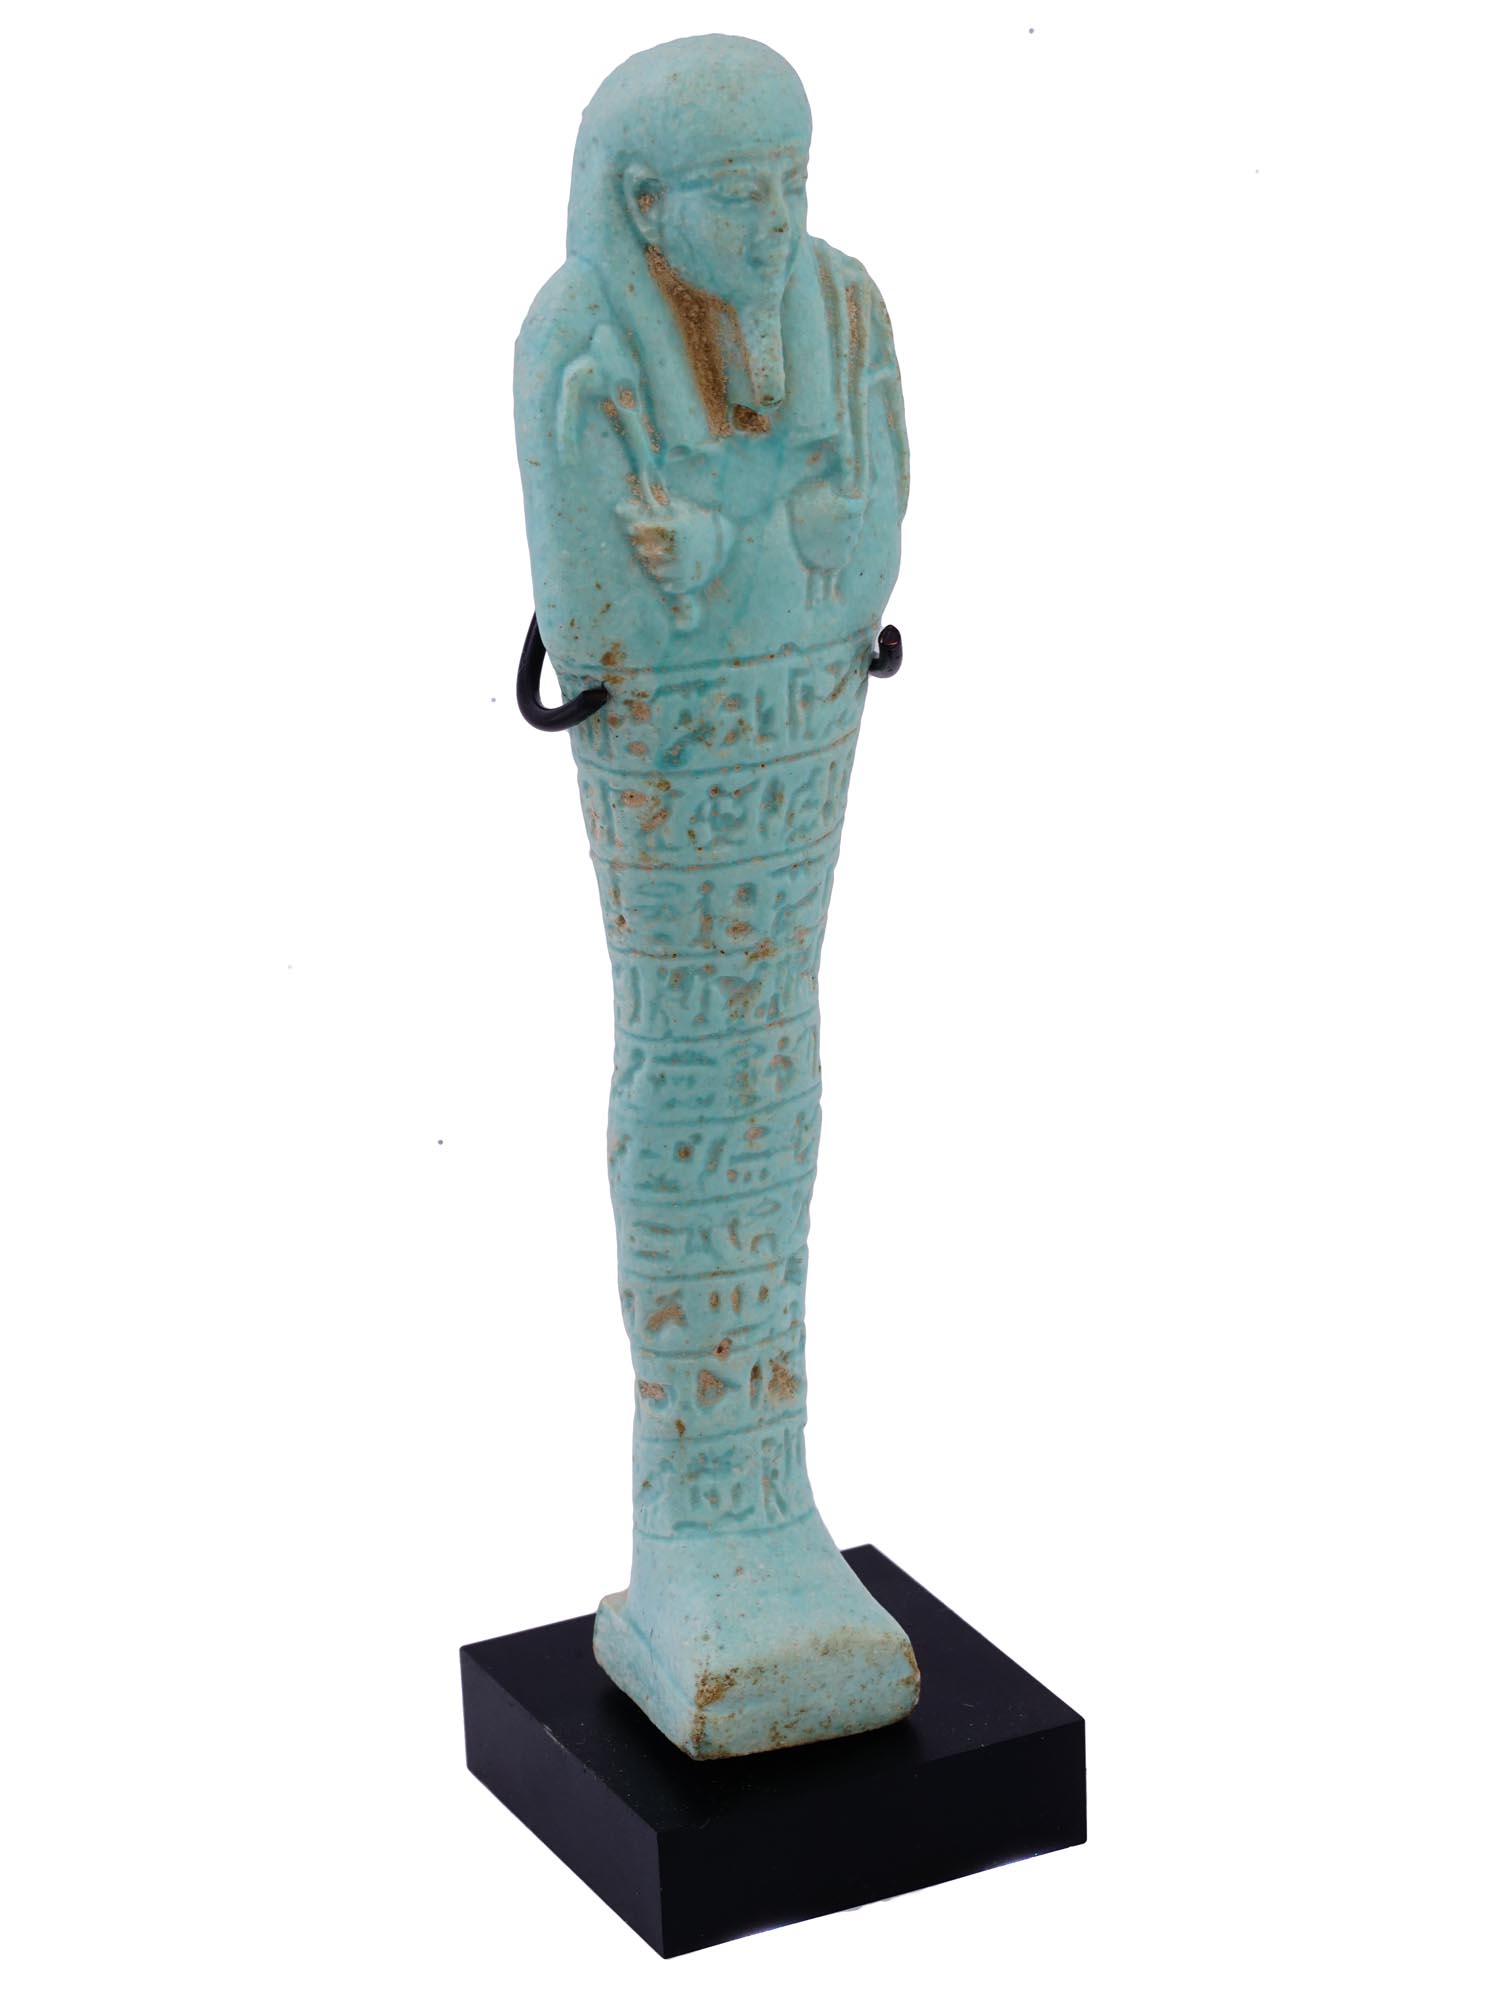 EGYPTIAN FAIENCE USHABTI FIGURE WITH CHARACTERS ON BASE PIC-0